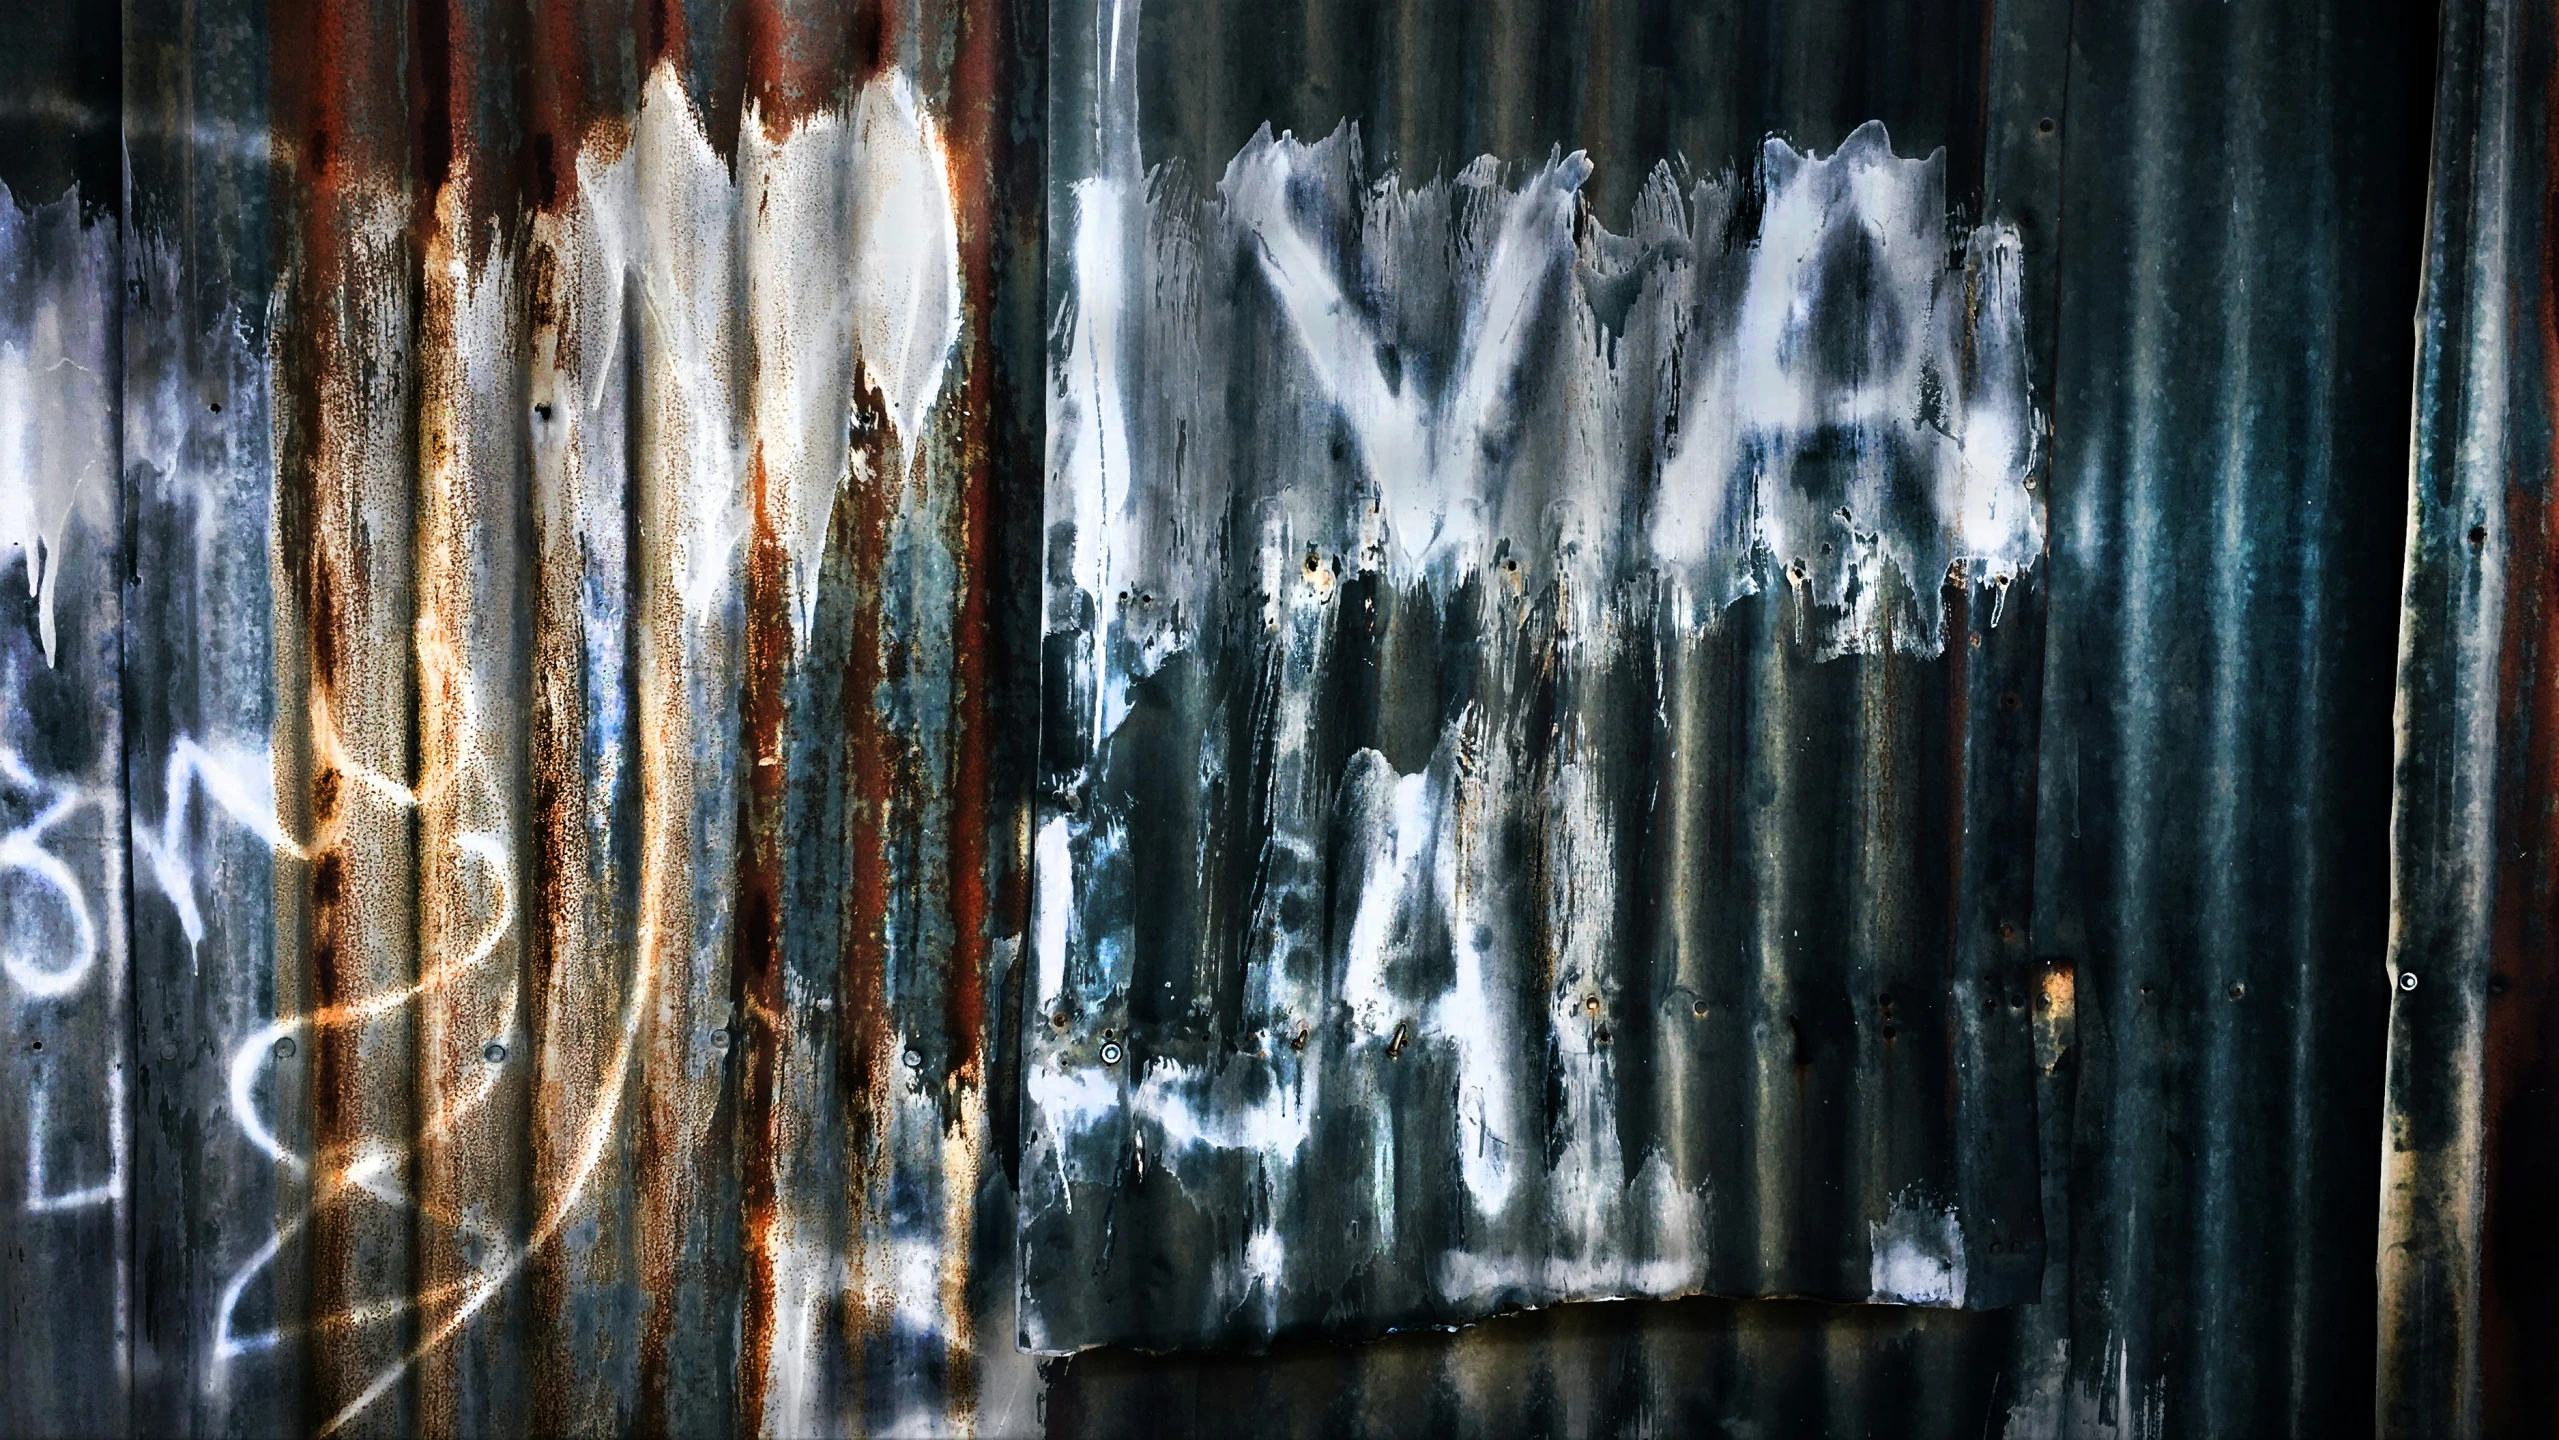 a wall with various graffiti written on it